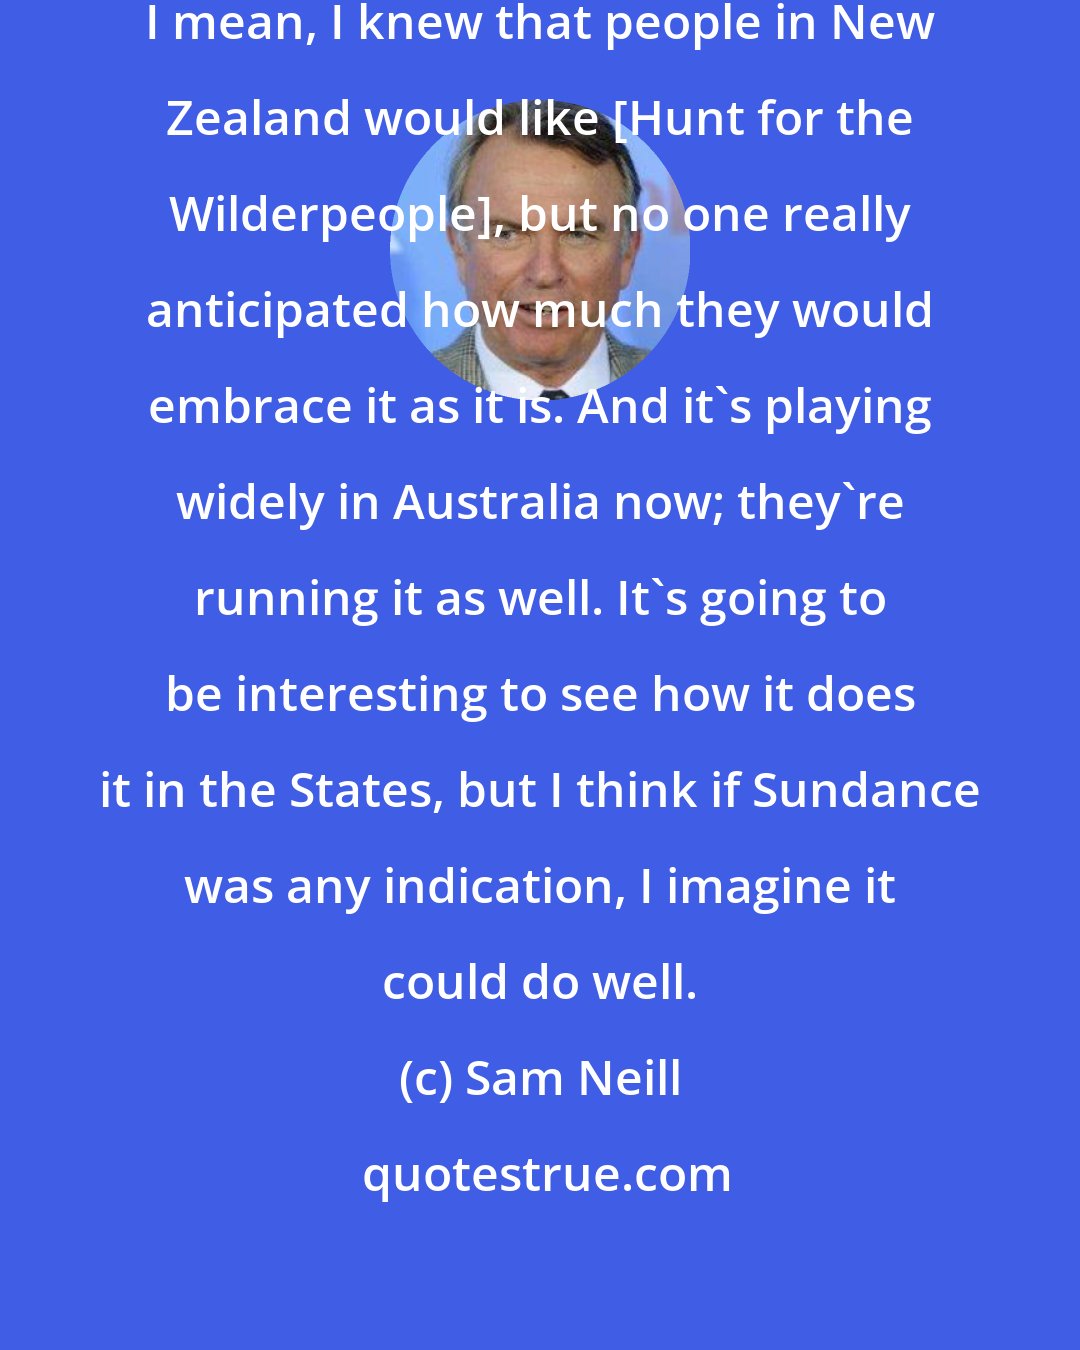 Sam Neill: I think it took us all by surprise. I mean, I knew that people in New Zealand would like [Hunt for the Wilderpeople], but no one really anticipated how much they would embrace it as it is. And it's playing widely in Australia now; they're running it as well. It's going to be interesting to see how it does it in the States, but I think if Sundance was any indication, I imagine it could do well.